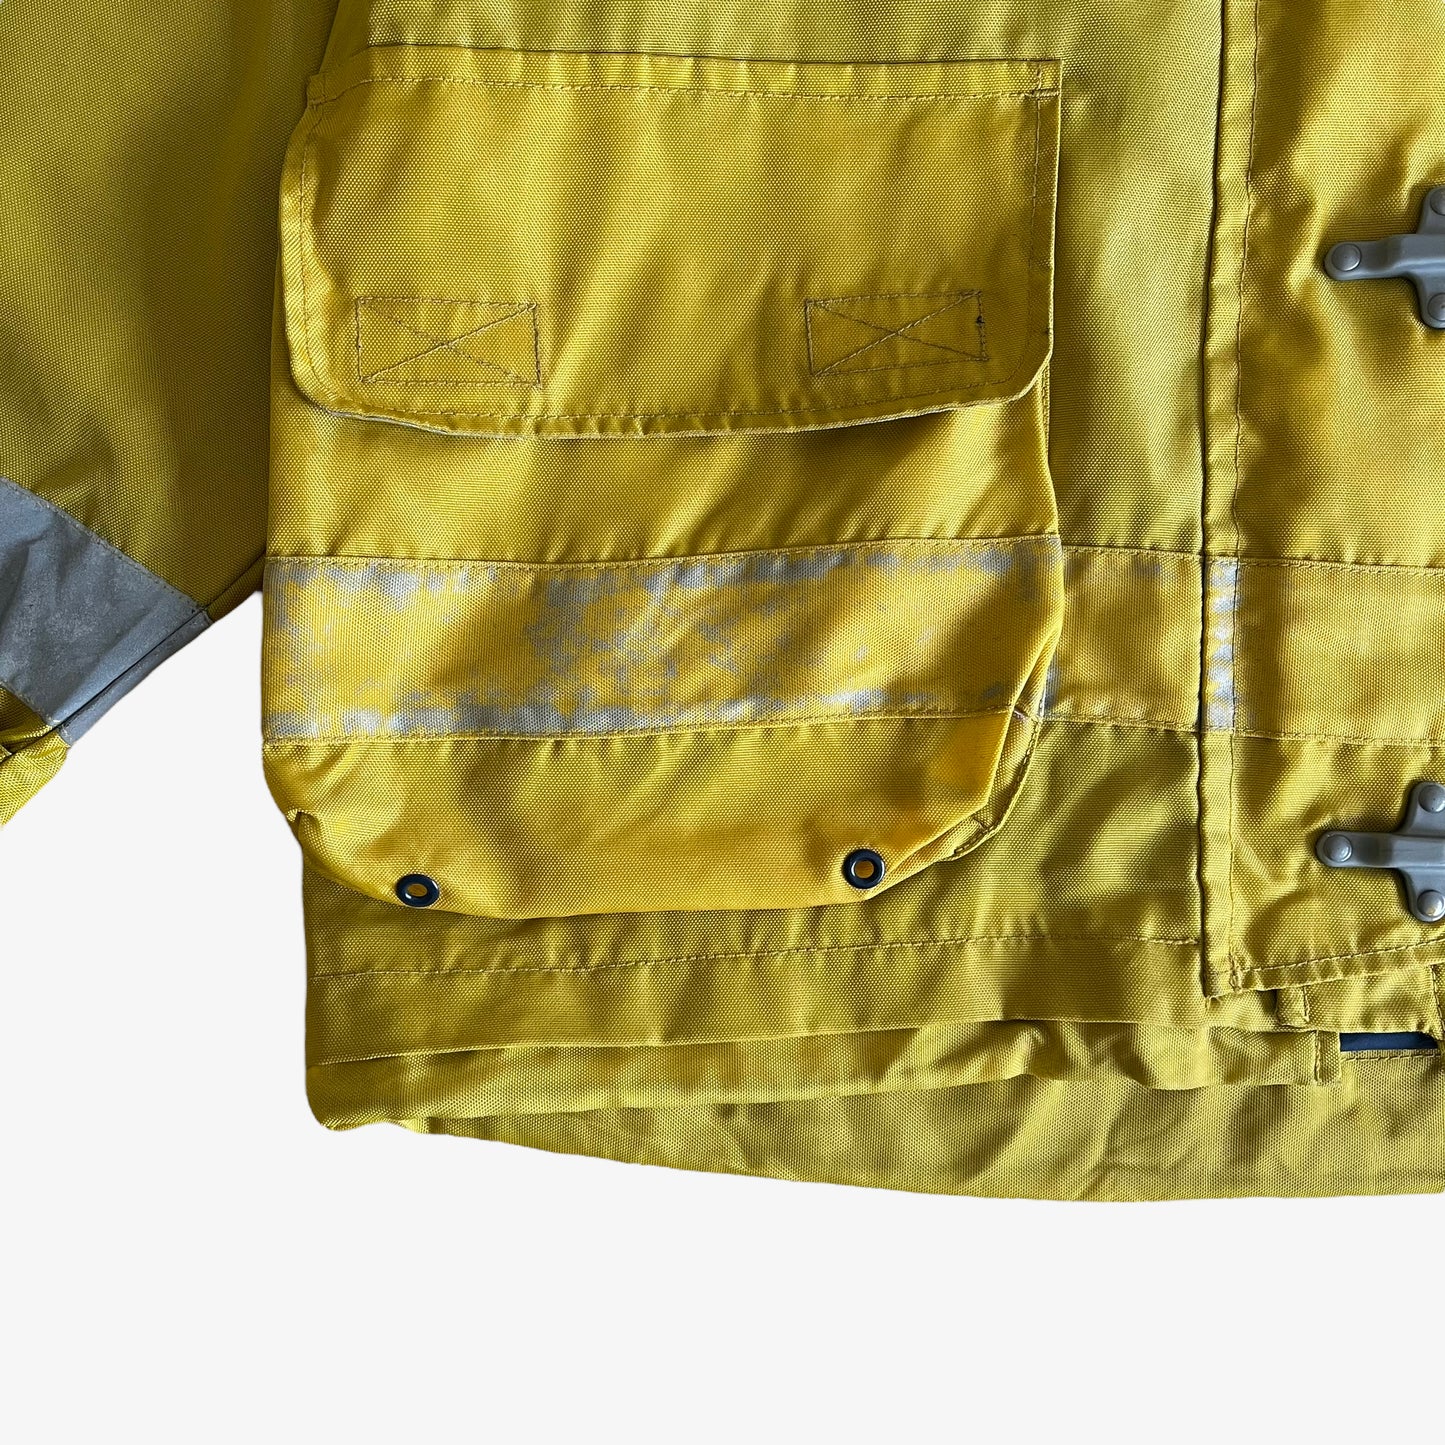 Vintage 90s Tommy Hilfiger Yellow Sailing Gear Jacket With Hook Fasteners Pocket - Casspios Dream